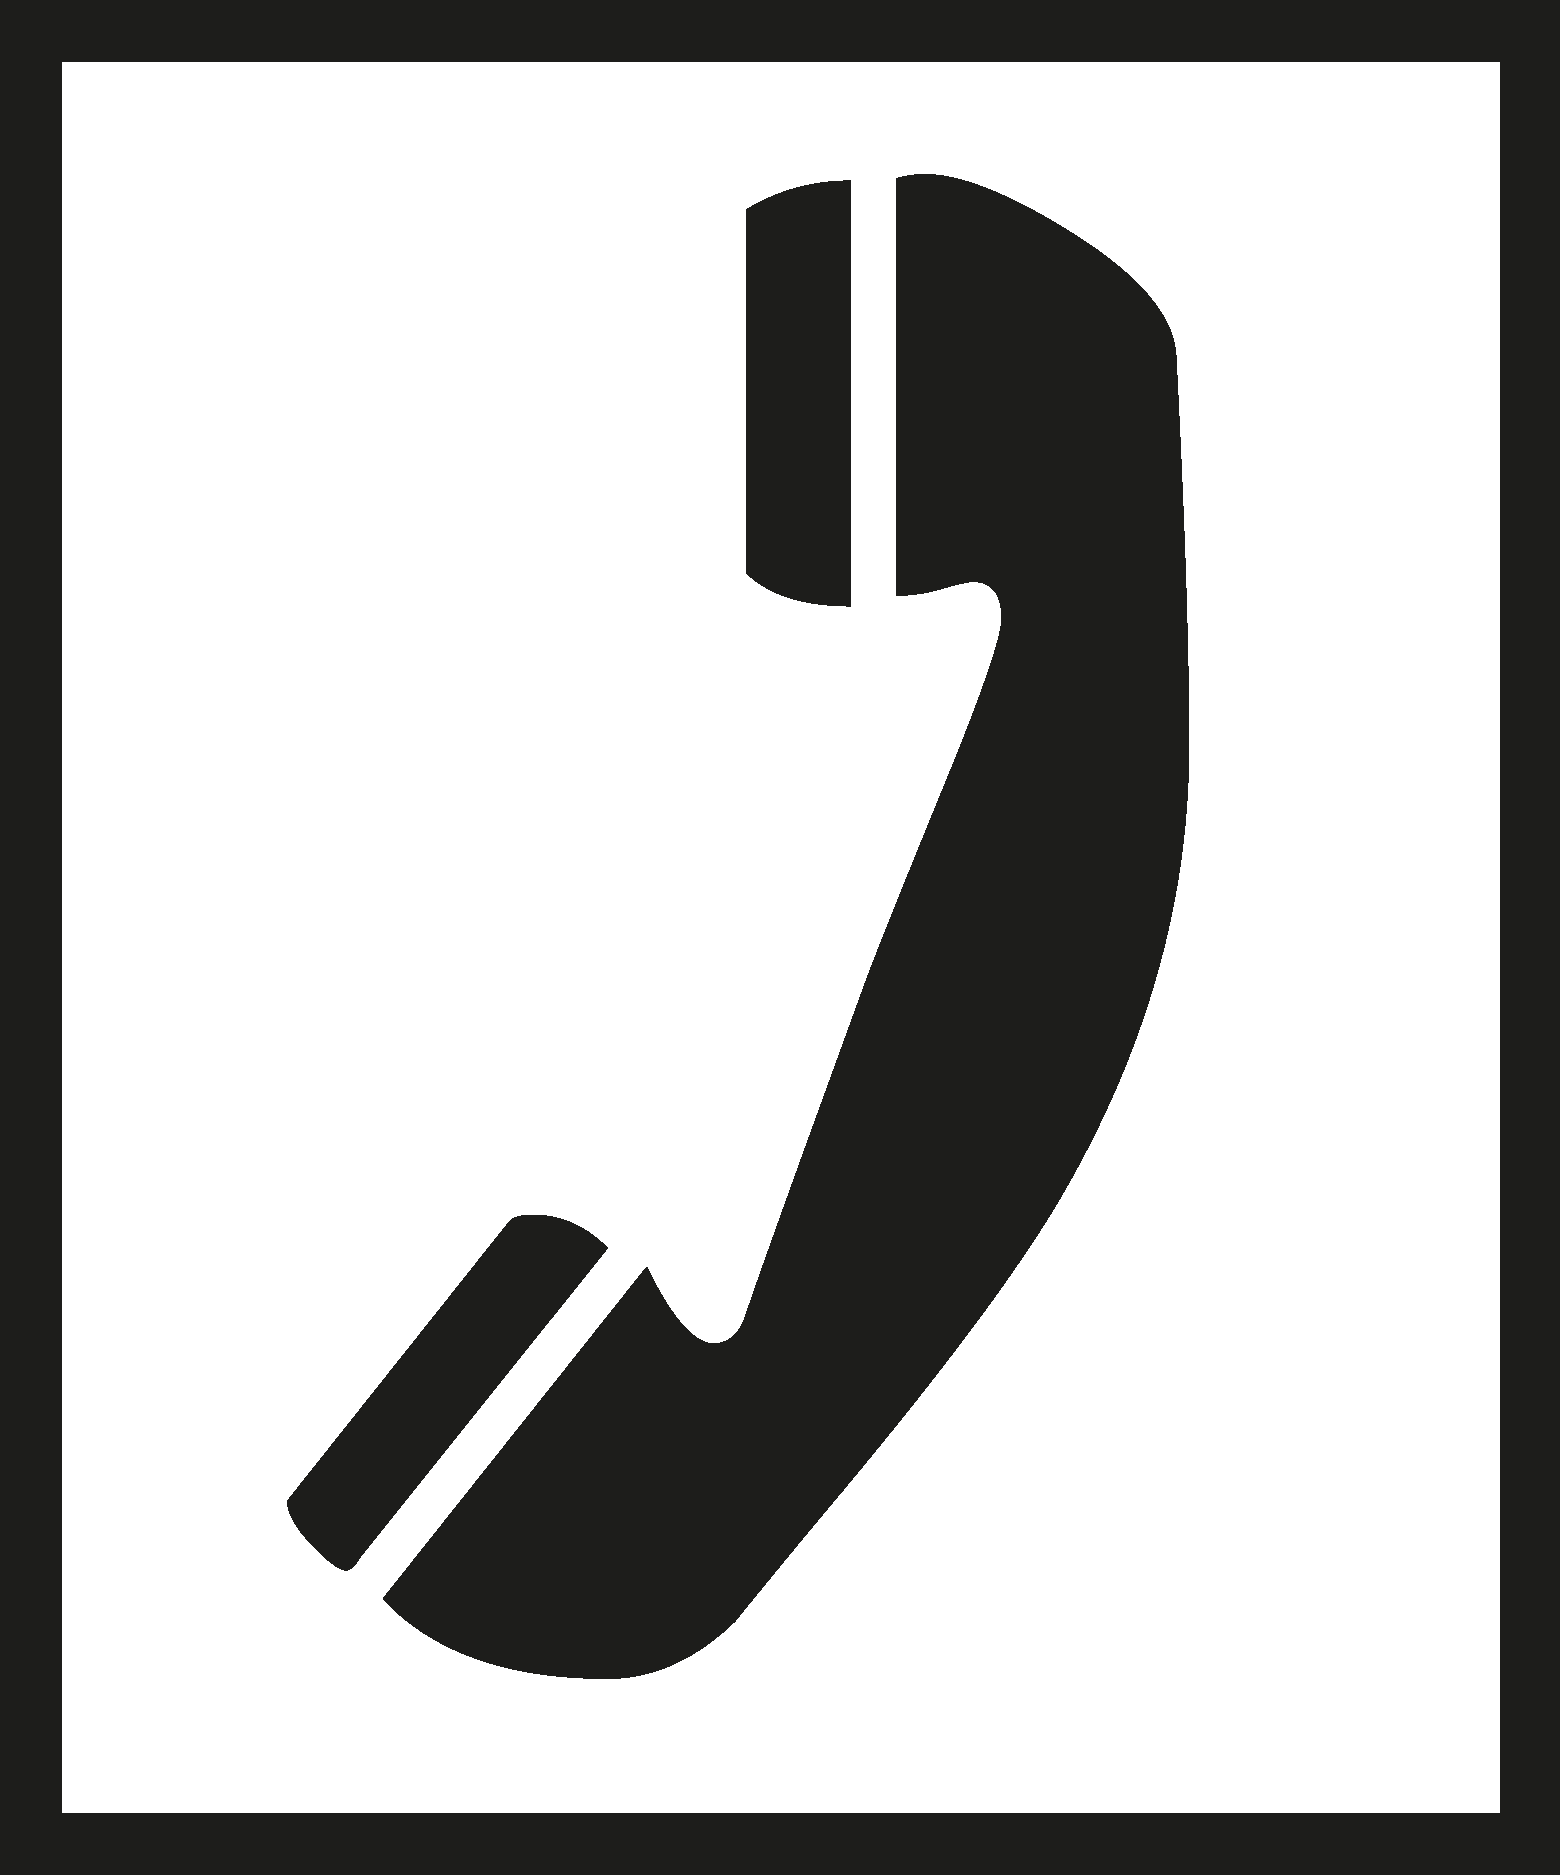 Telephone Vector Icons free download in SVG, PNG Format